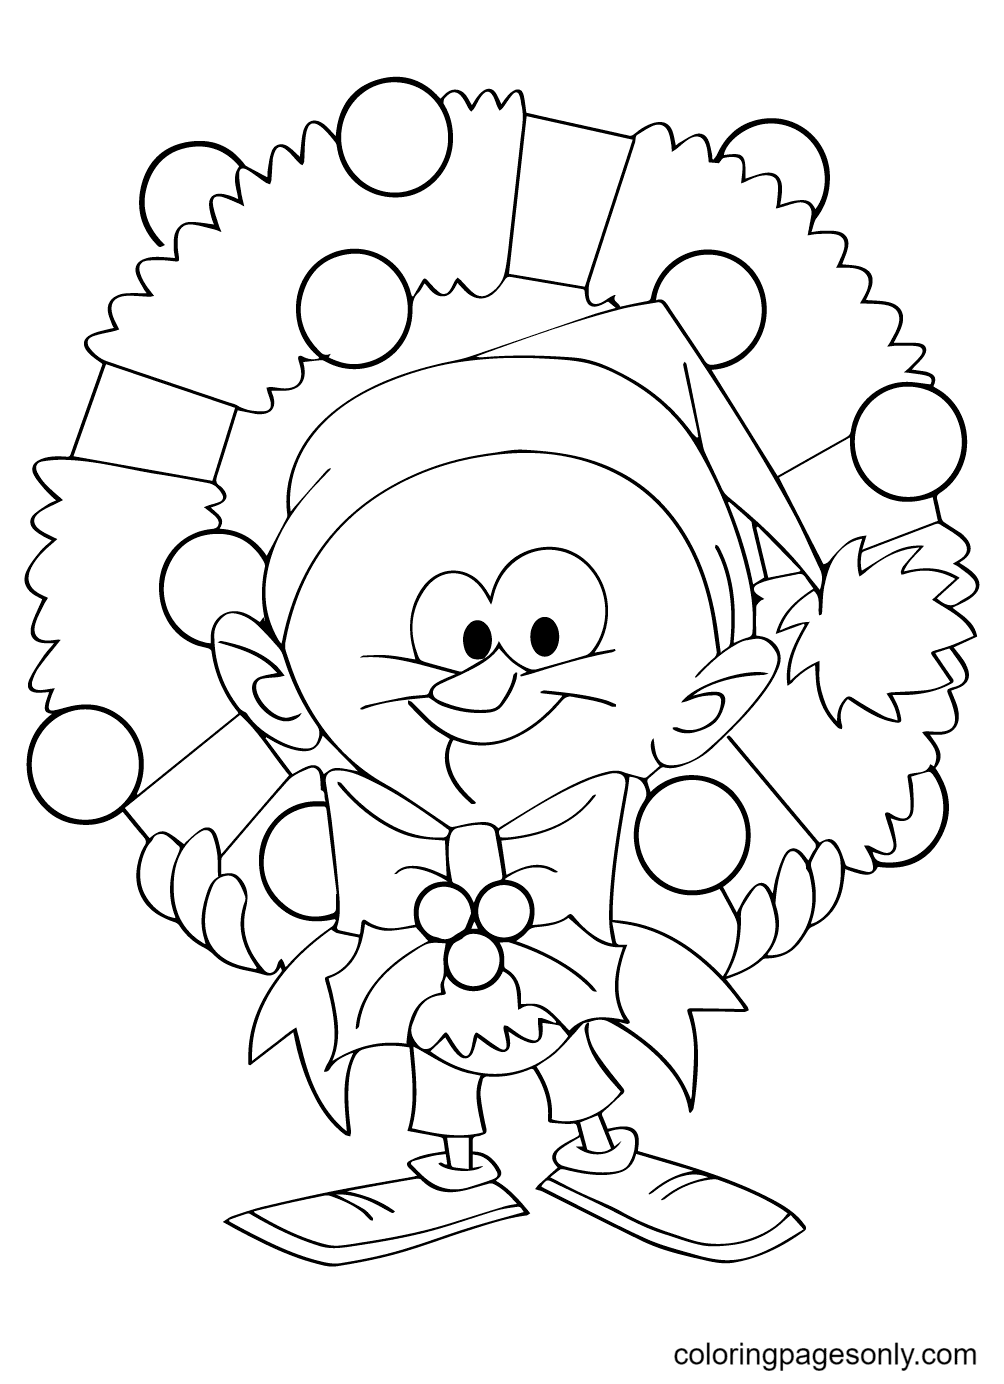 Cartoon Guy Holding Christmas Wreath Coloring Pages